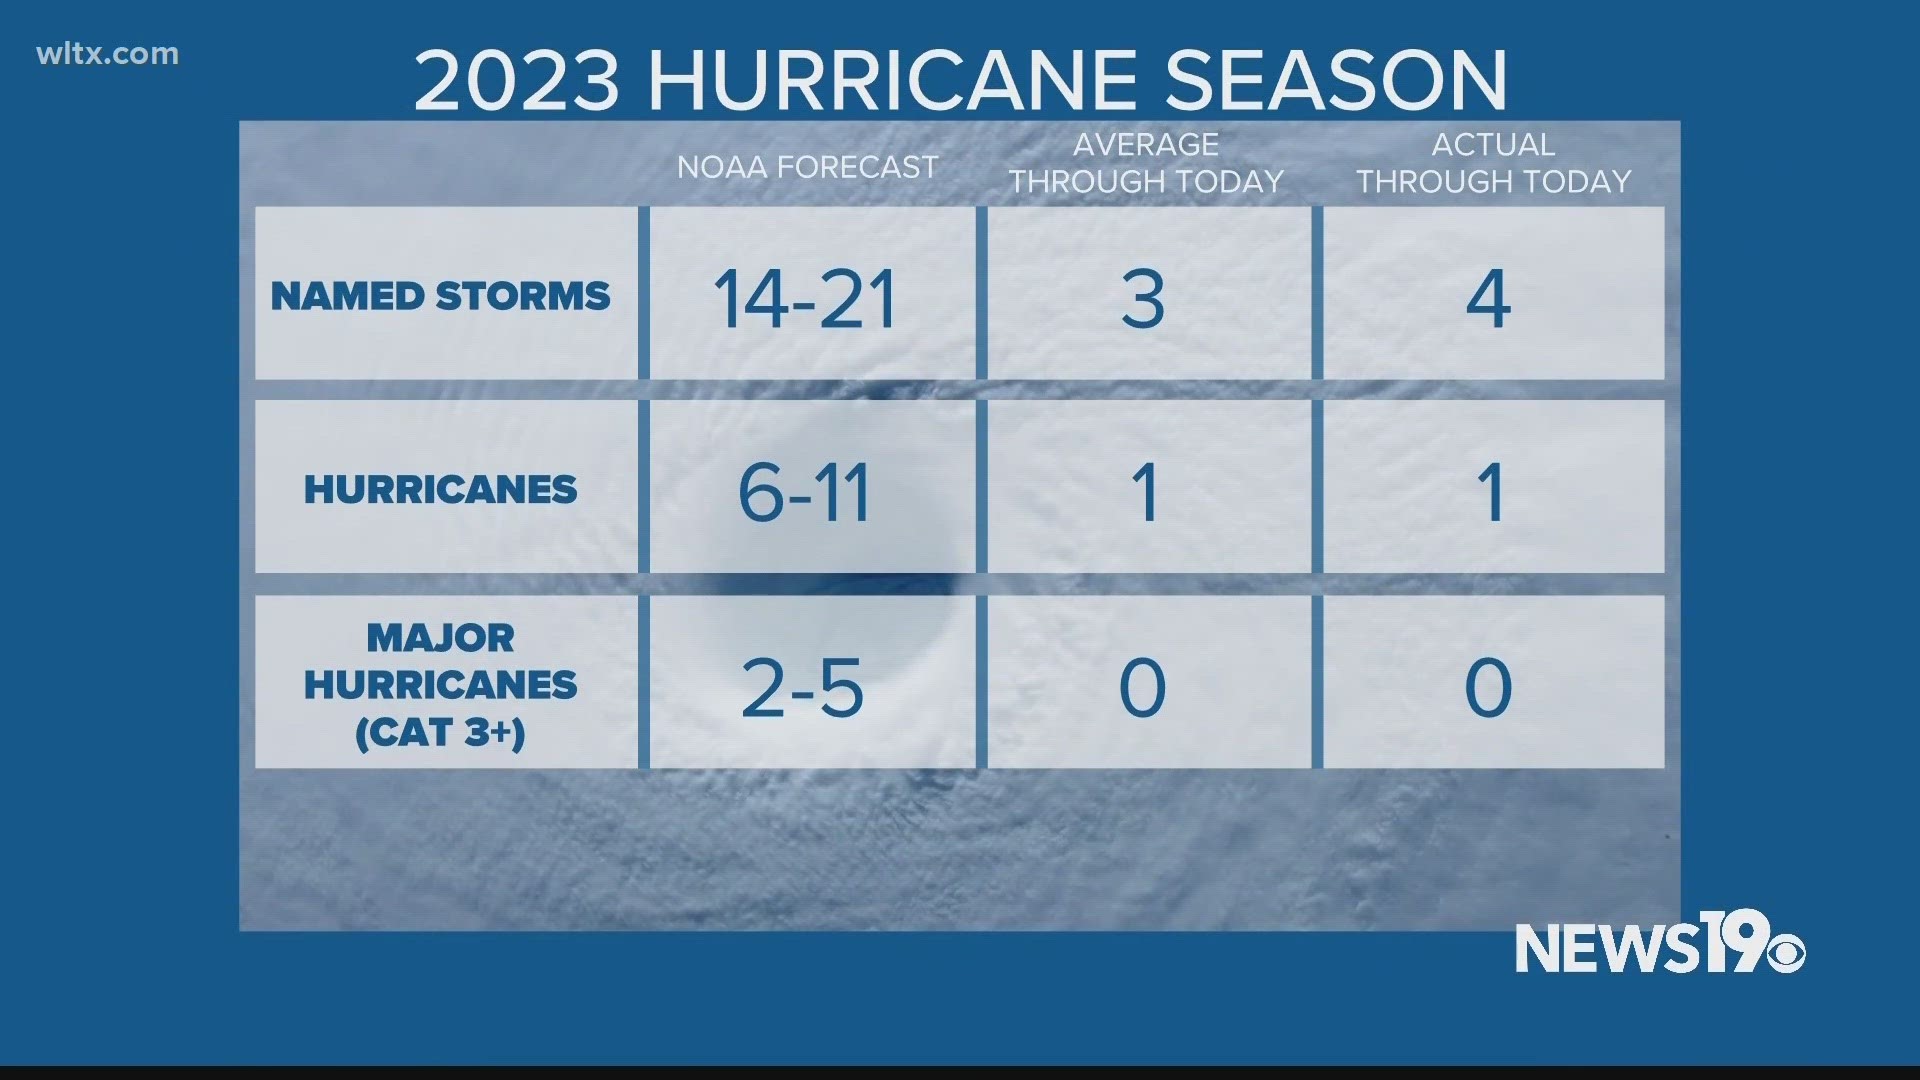 Warmer-than-normal Atlantic Ocean temperatures and lighter winds are expected to contribute to a busier-than-normal hurricane season this year.